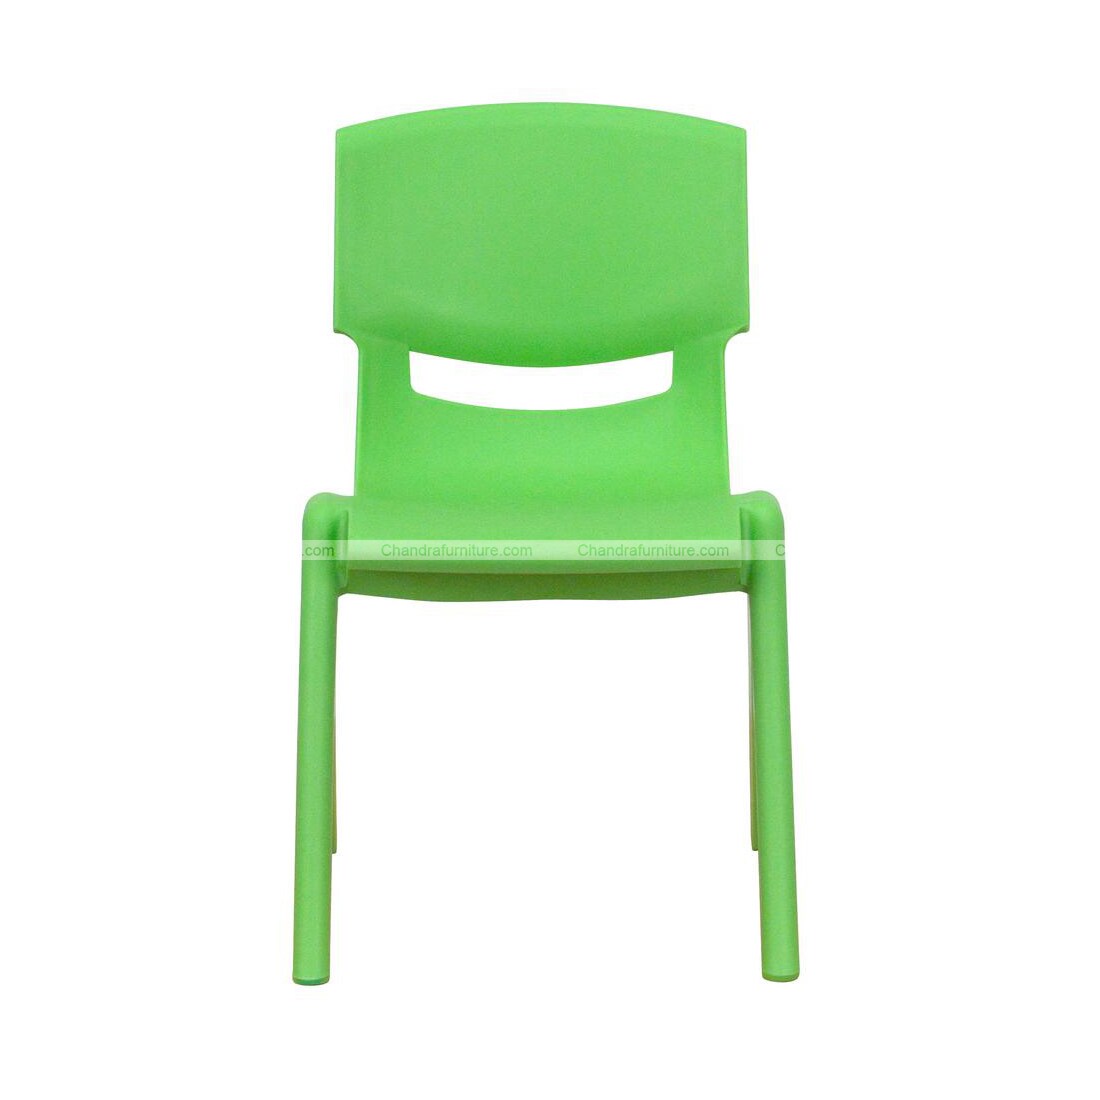 Chandra Furniture Playgroup Seating Chair Green Colour ...